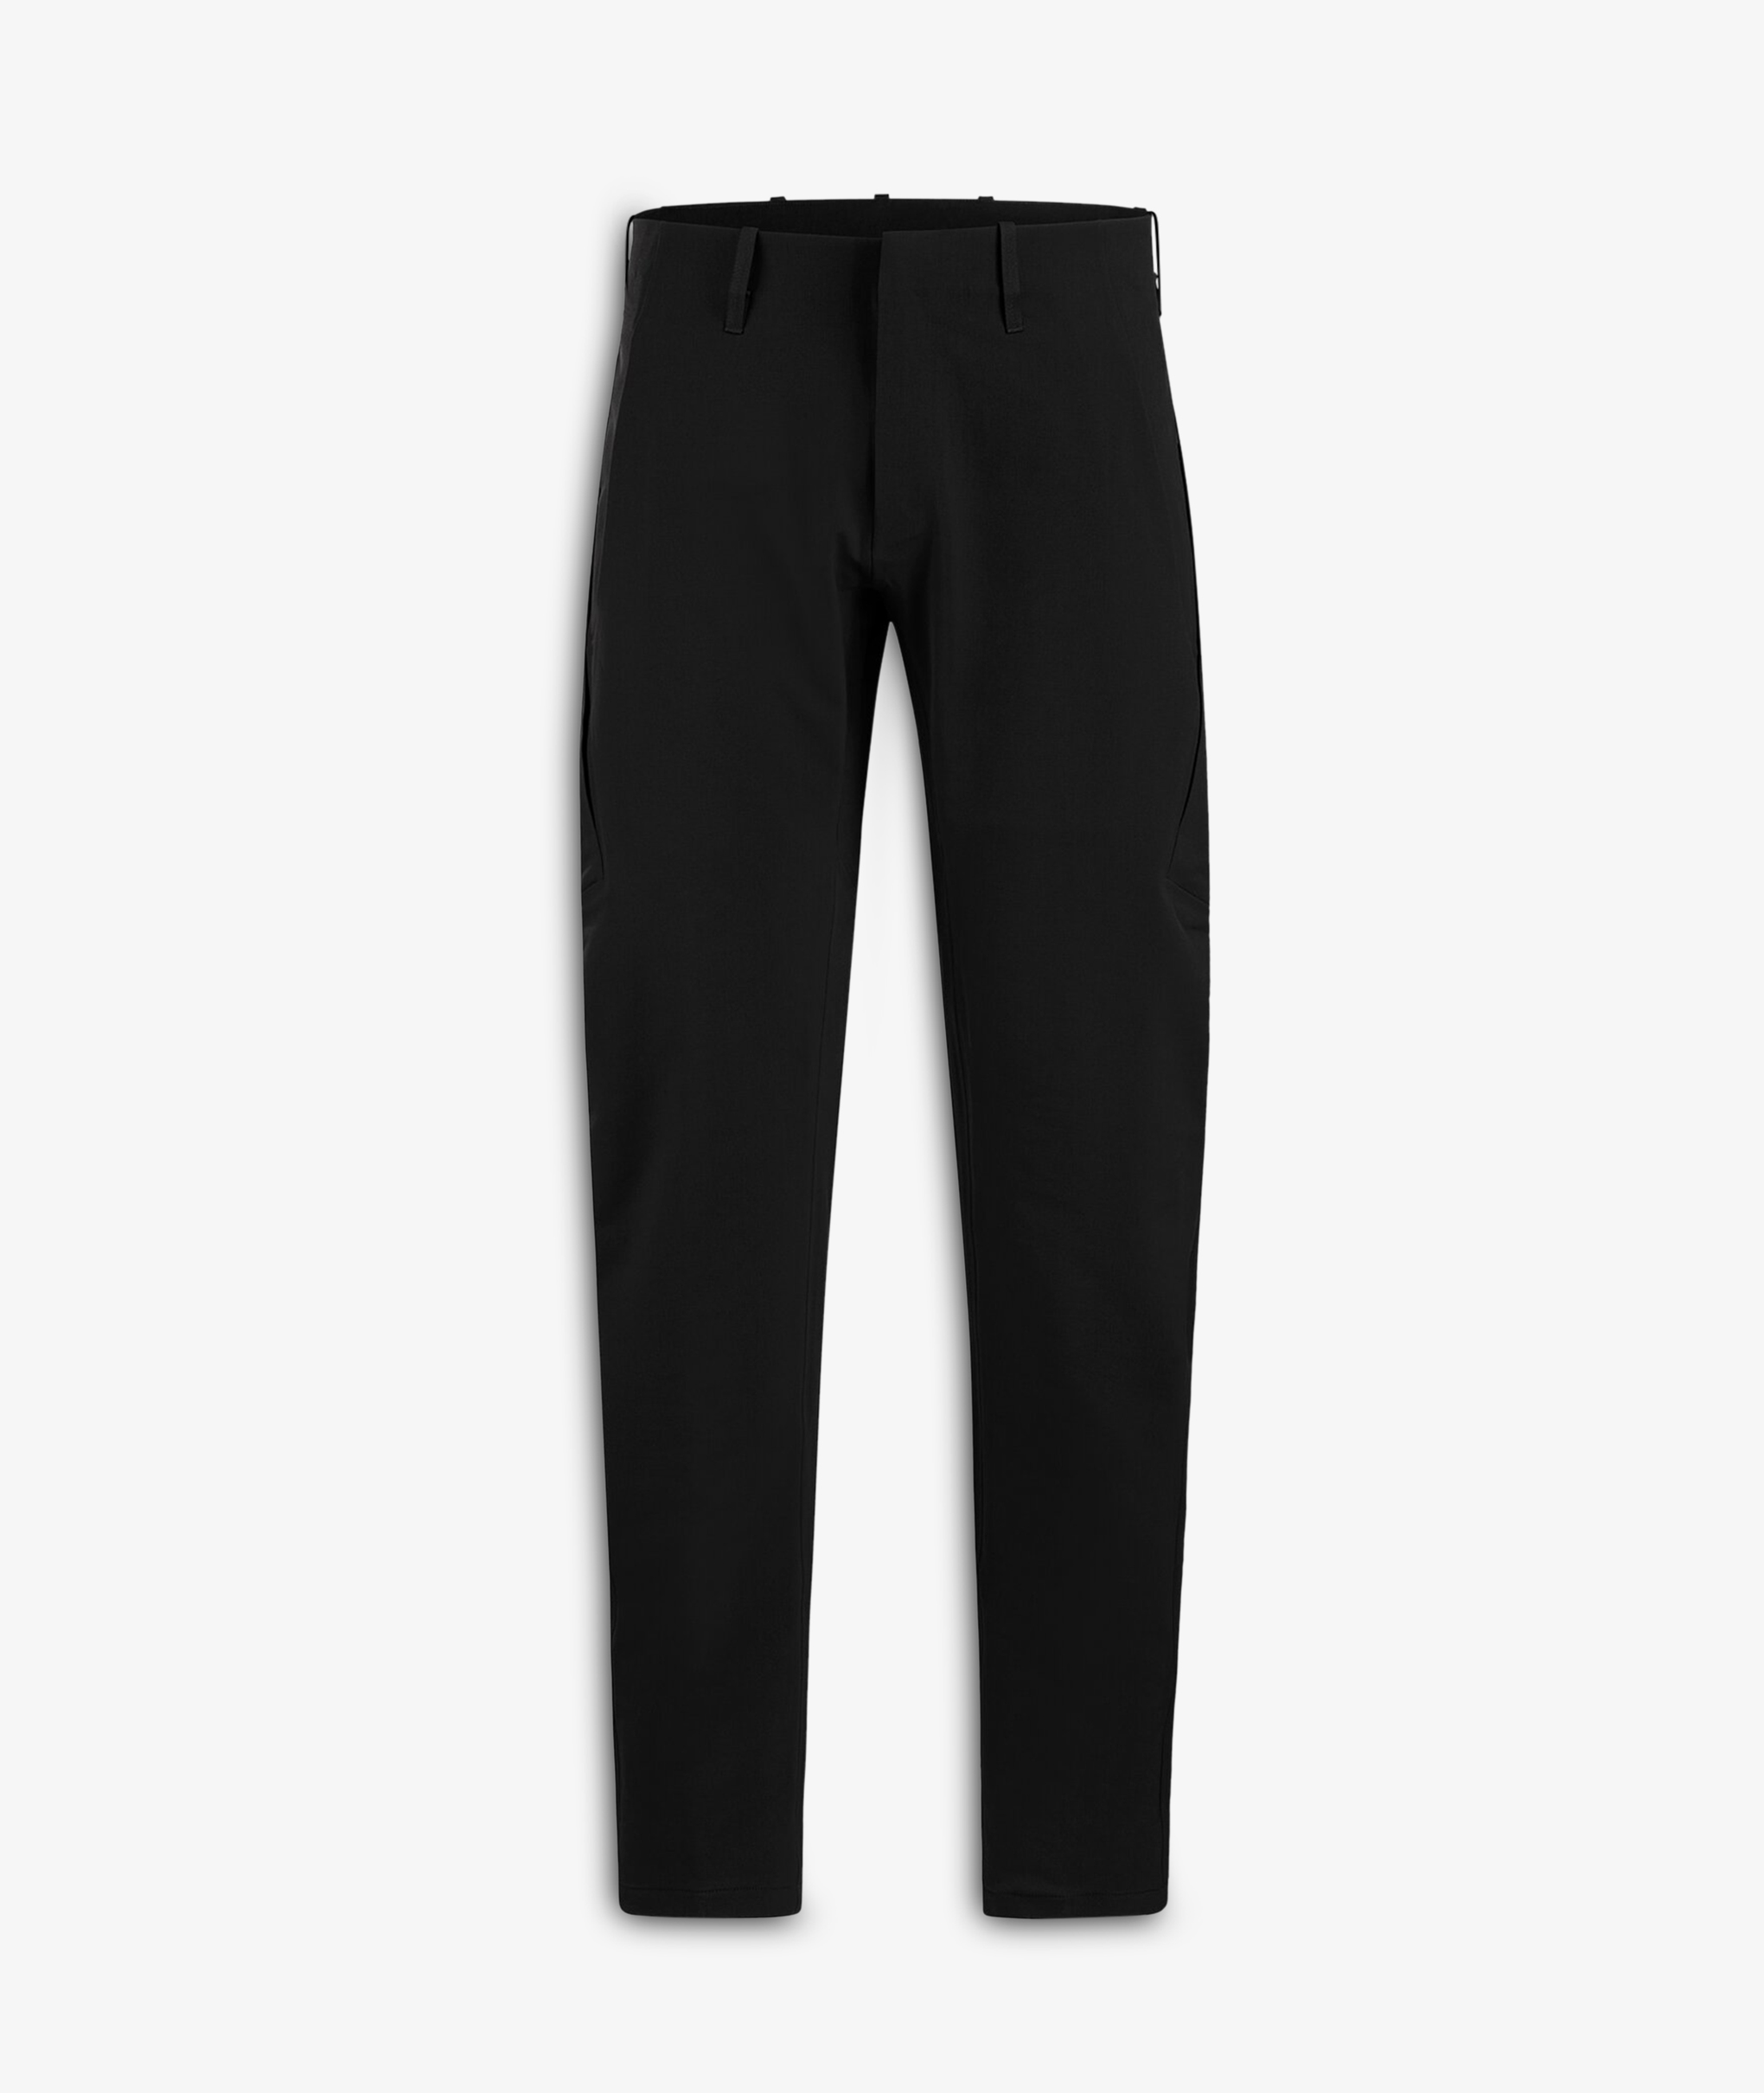 Norse Store | Shipping Worldwide - Veilance Align MX Pant M - Black